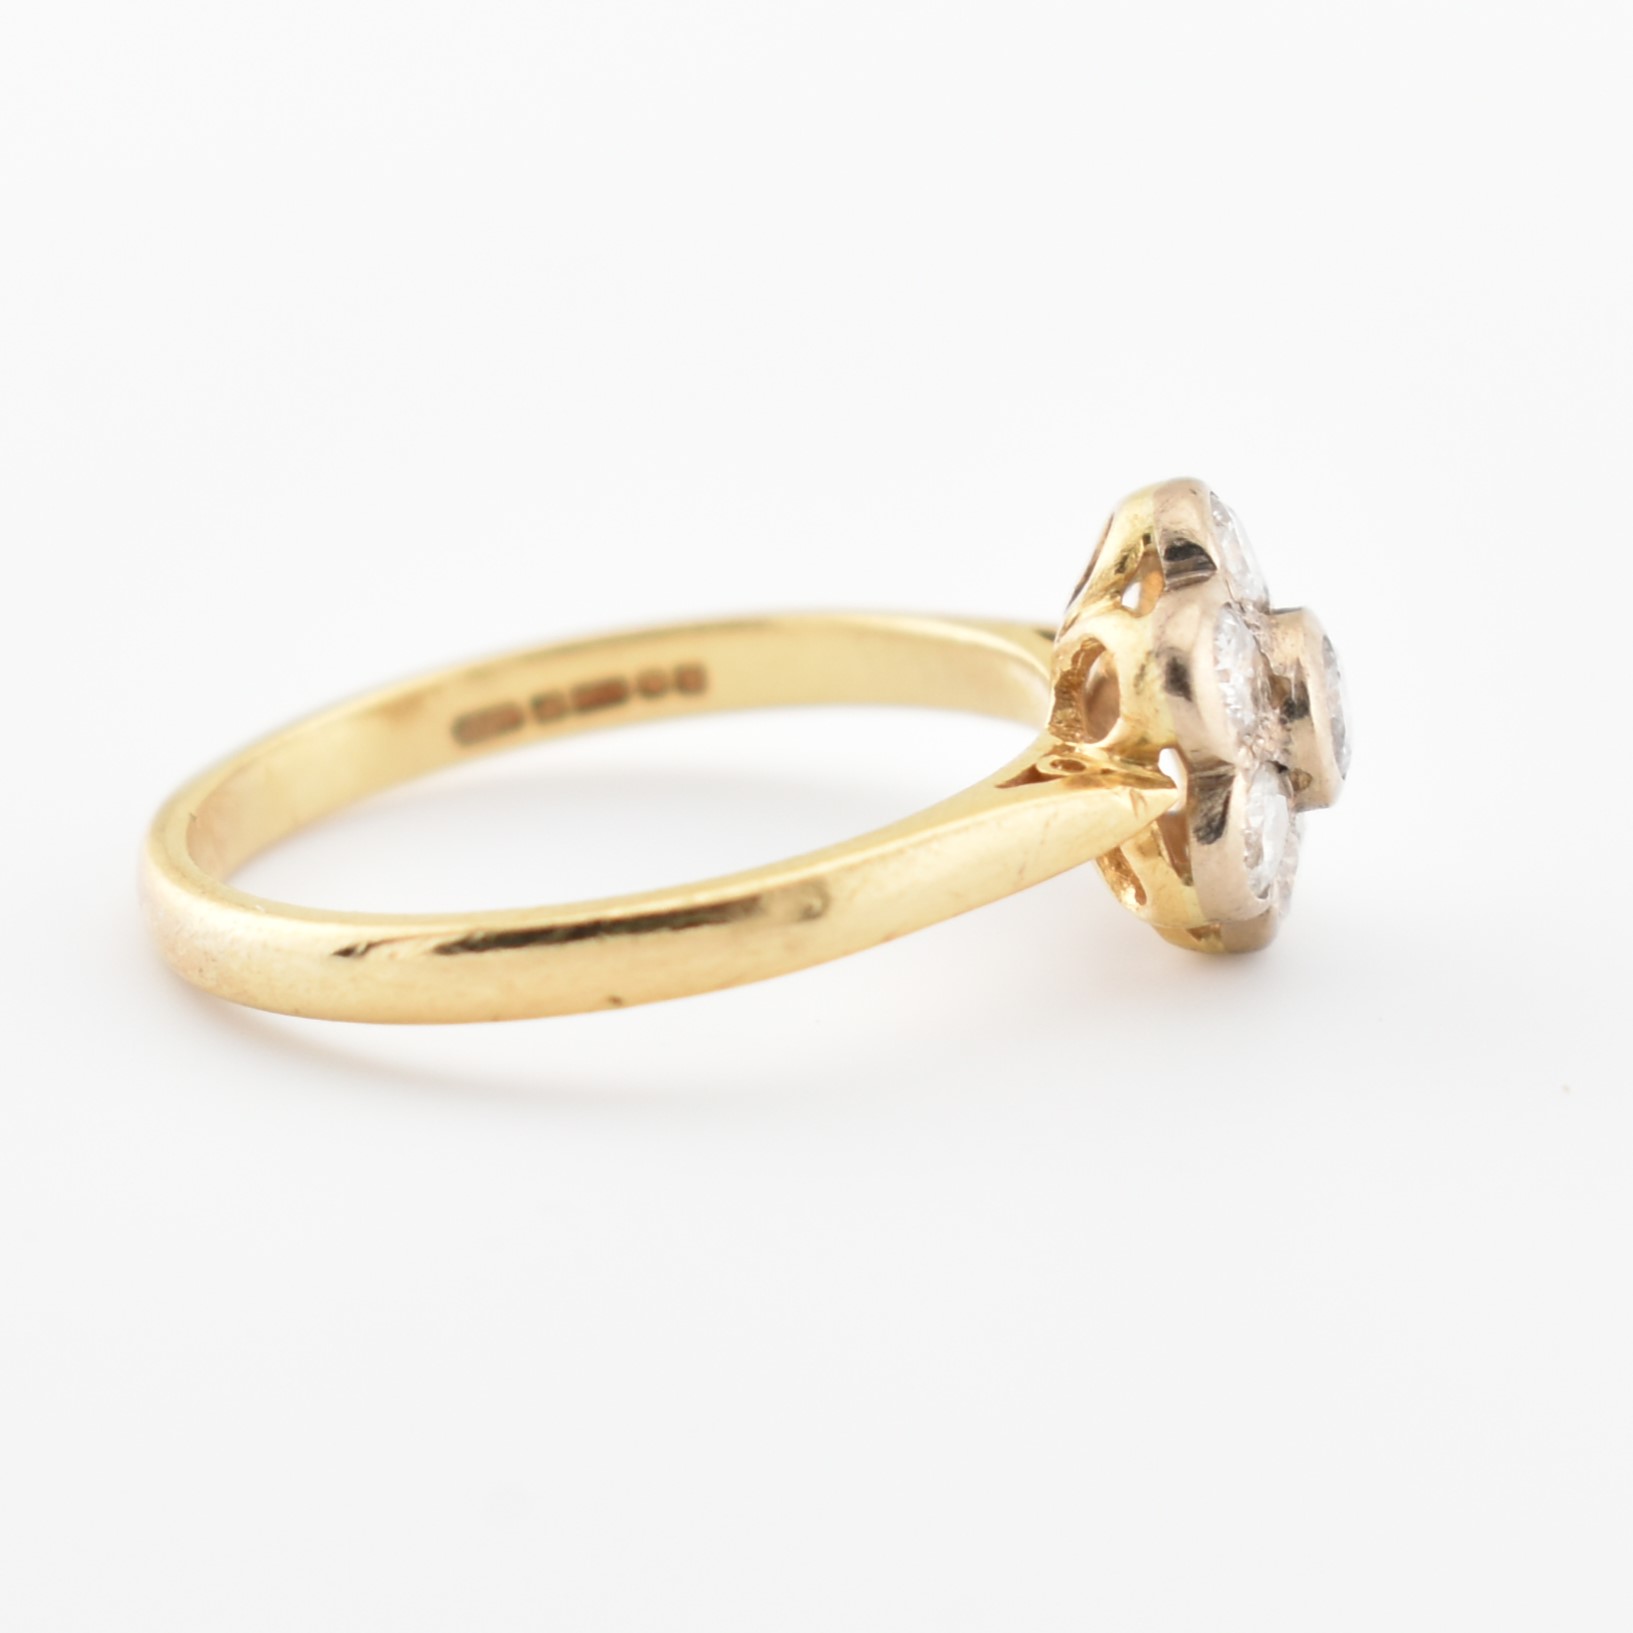 HALLMARKED 18CT GOLD & DIAMOND CLUSTER RING - Image 3 of 6